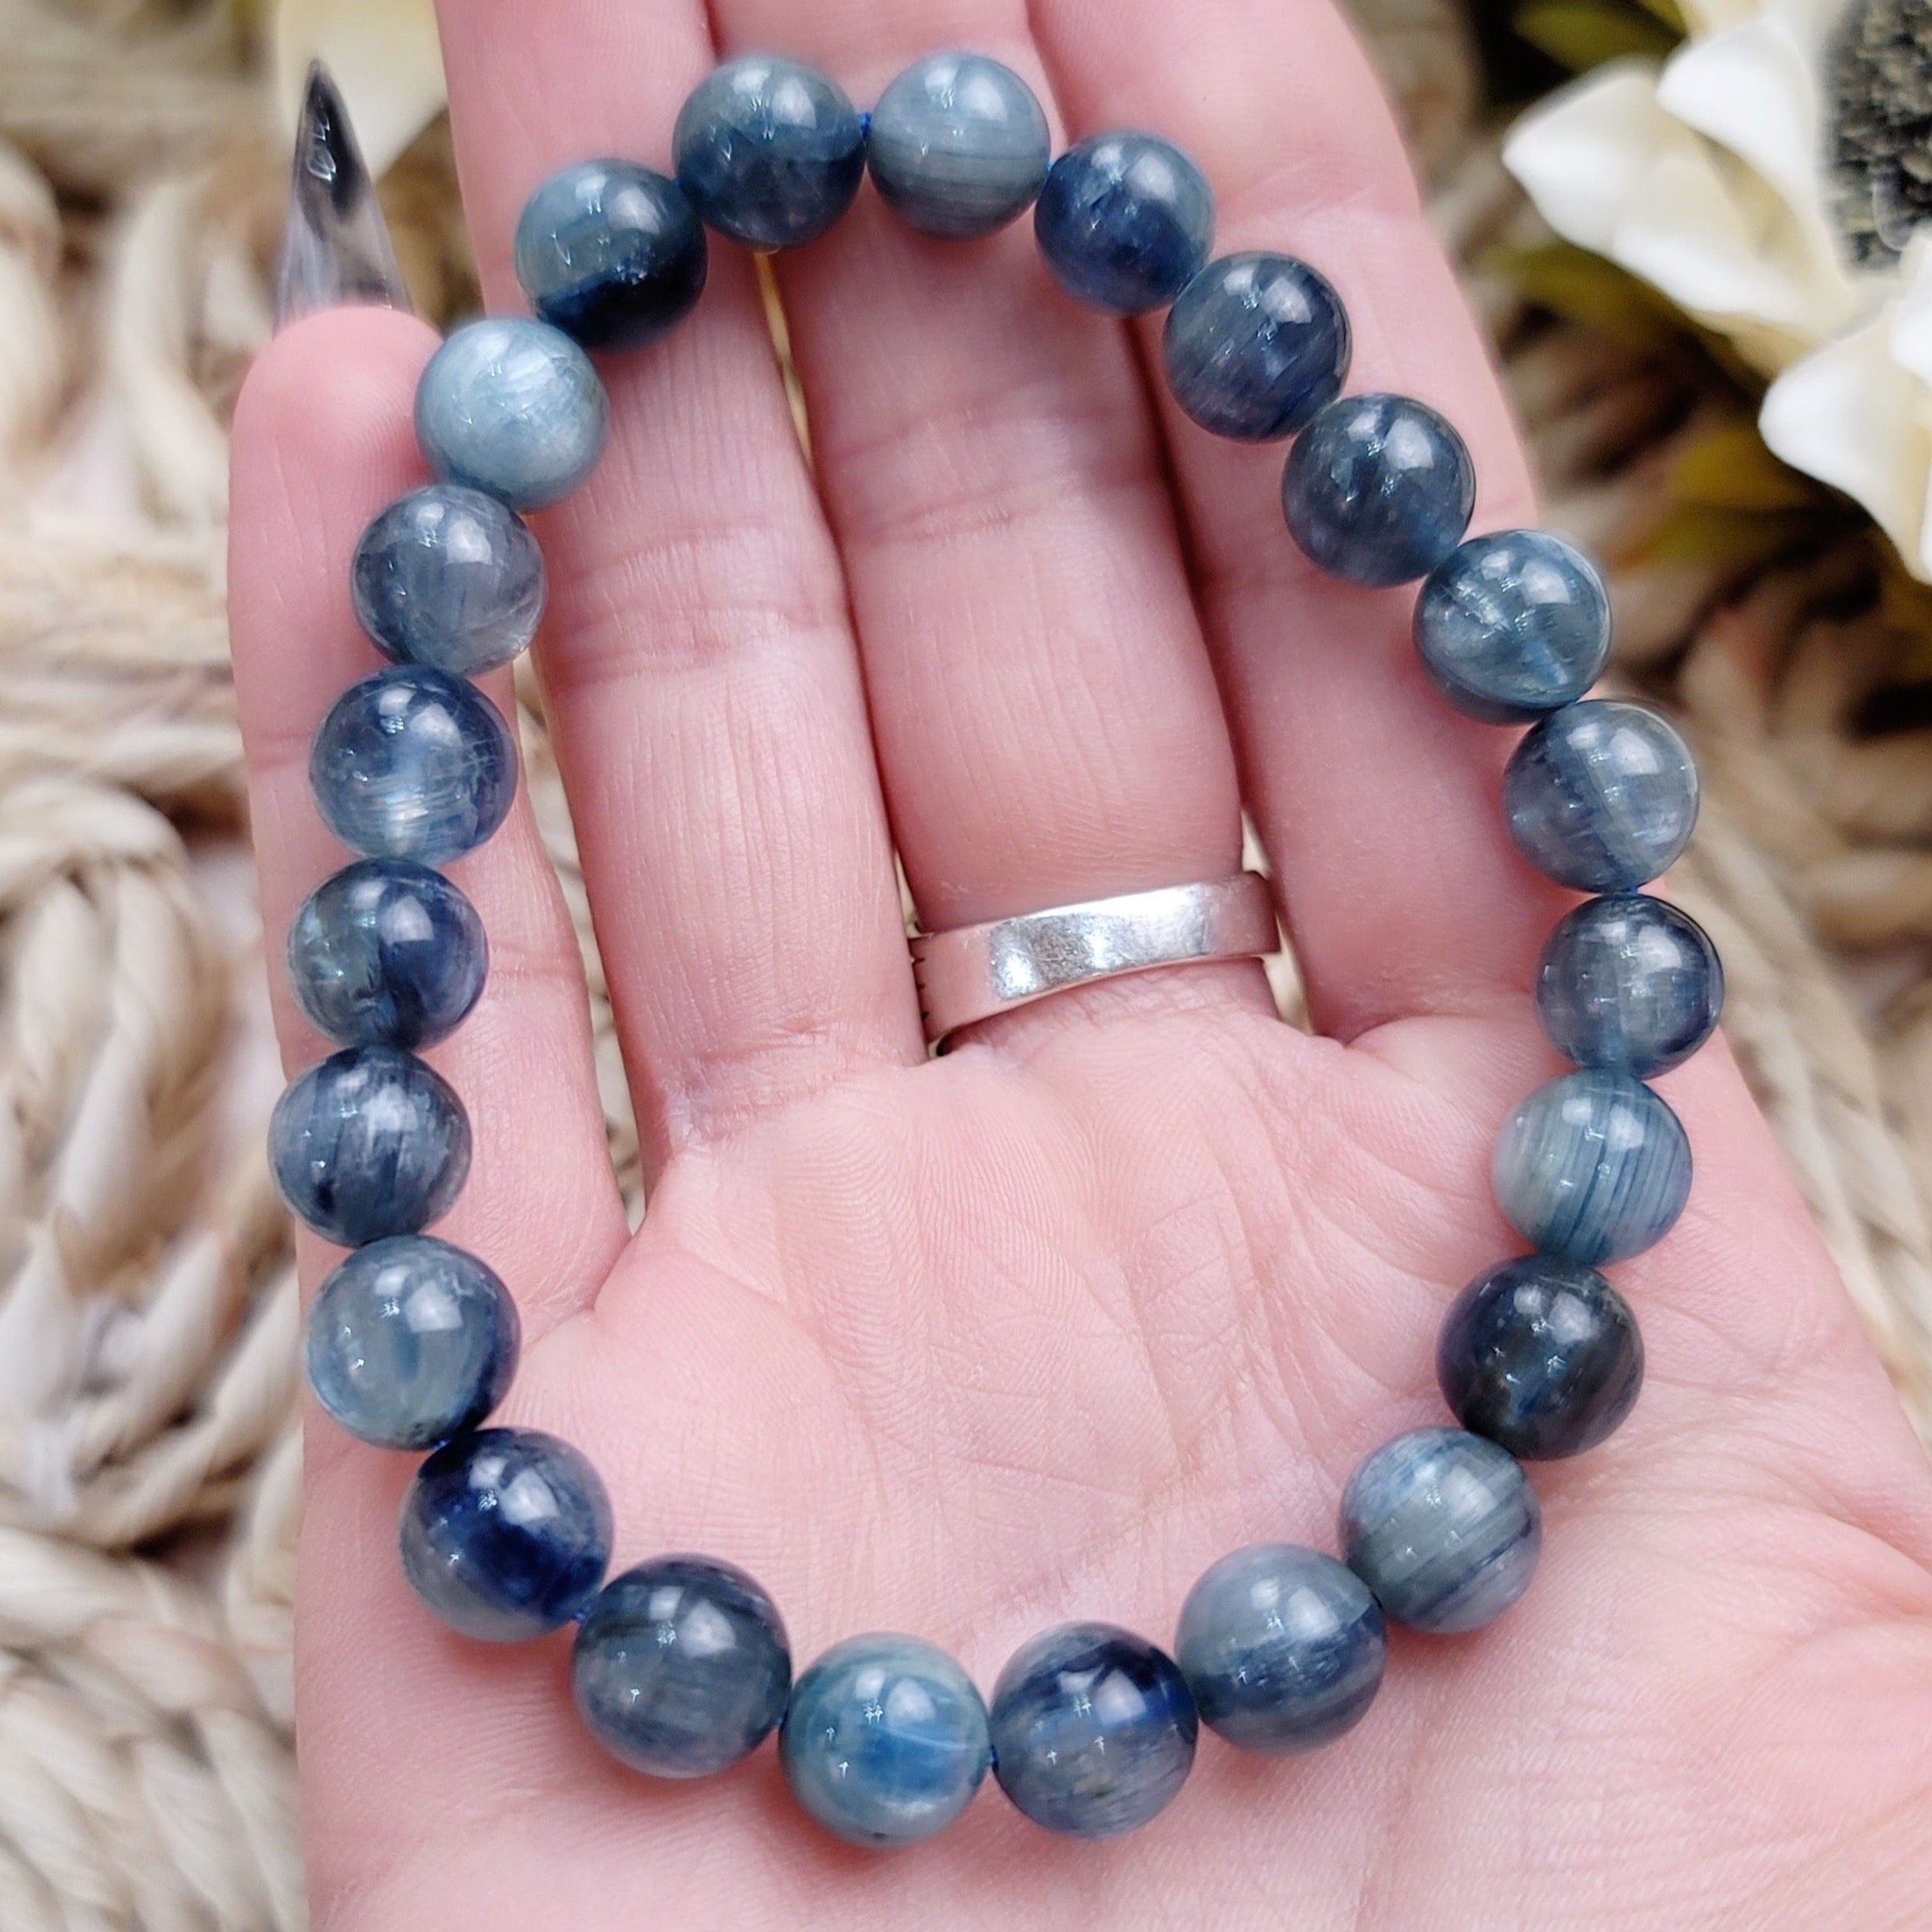 Teal Kyanite Bracelet for Grounding , Balancing All Chakras and Helping with Anxeity